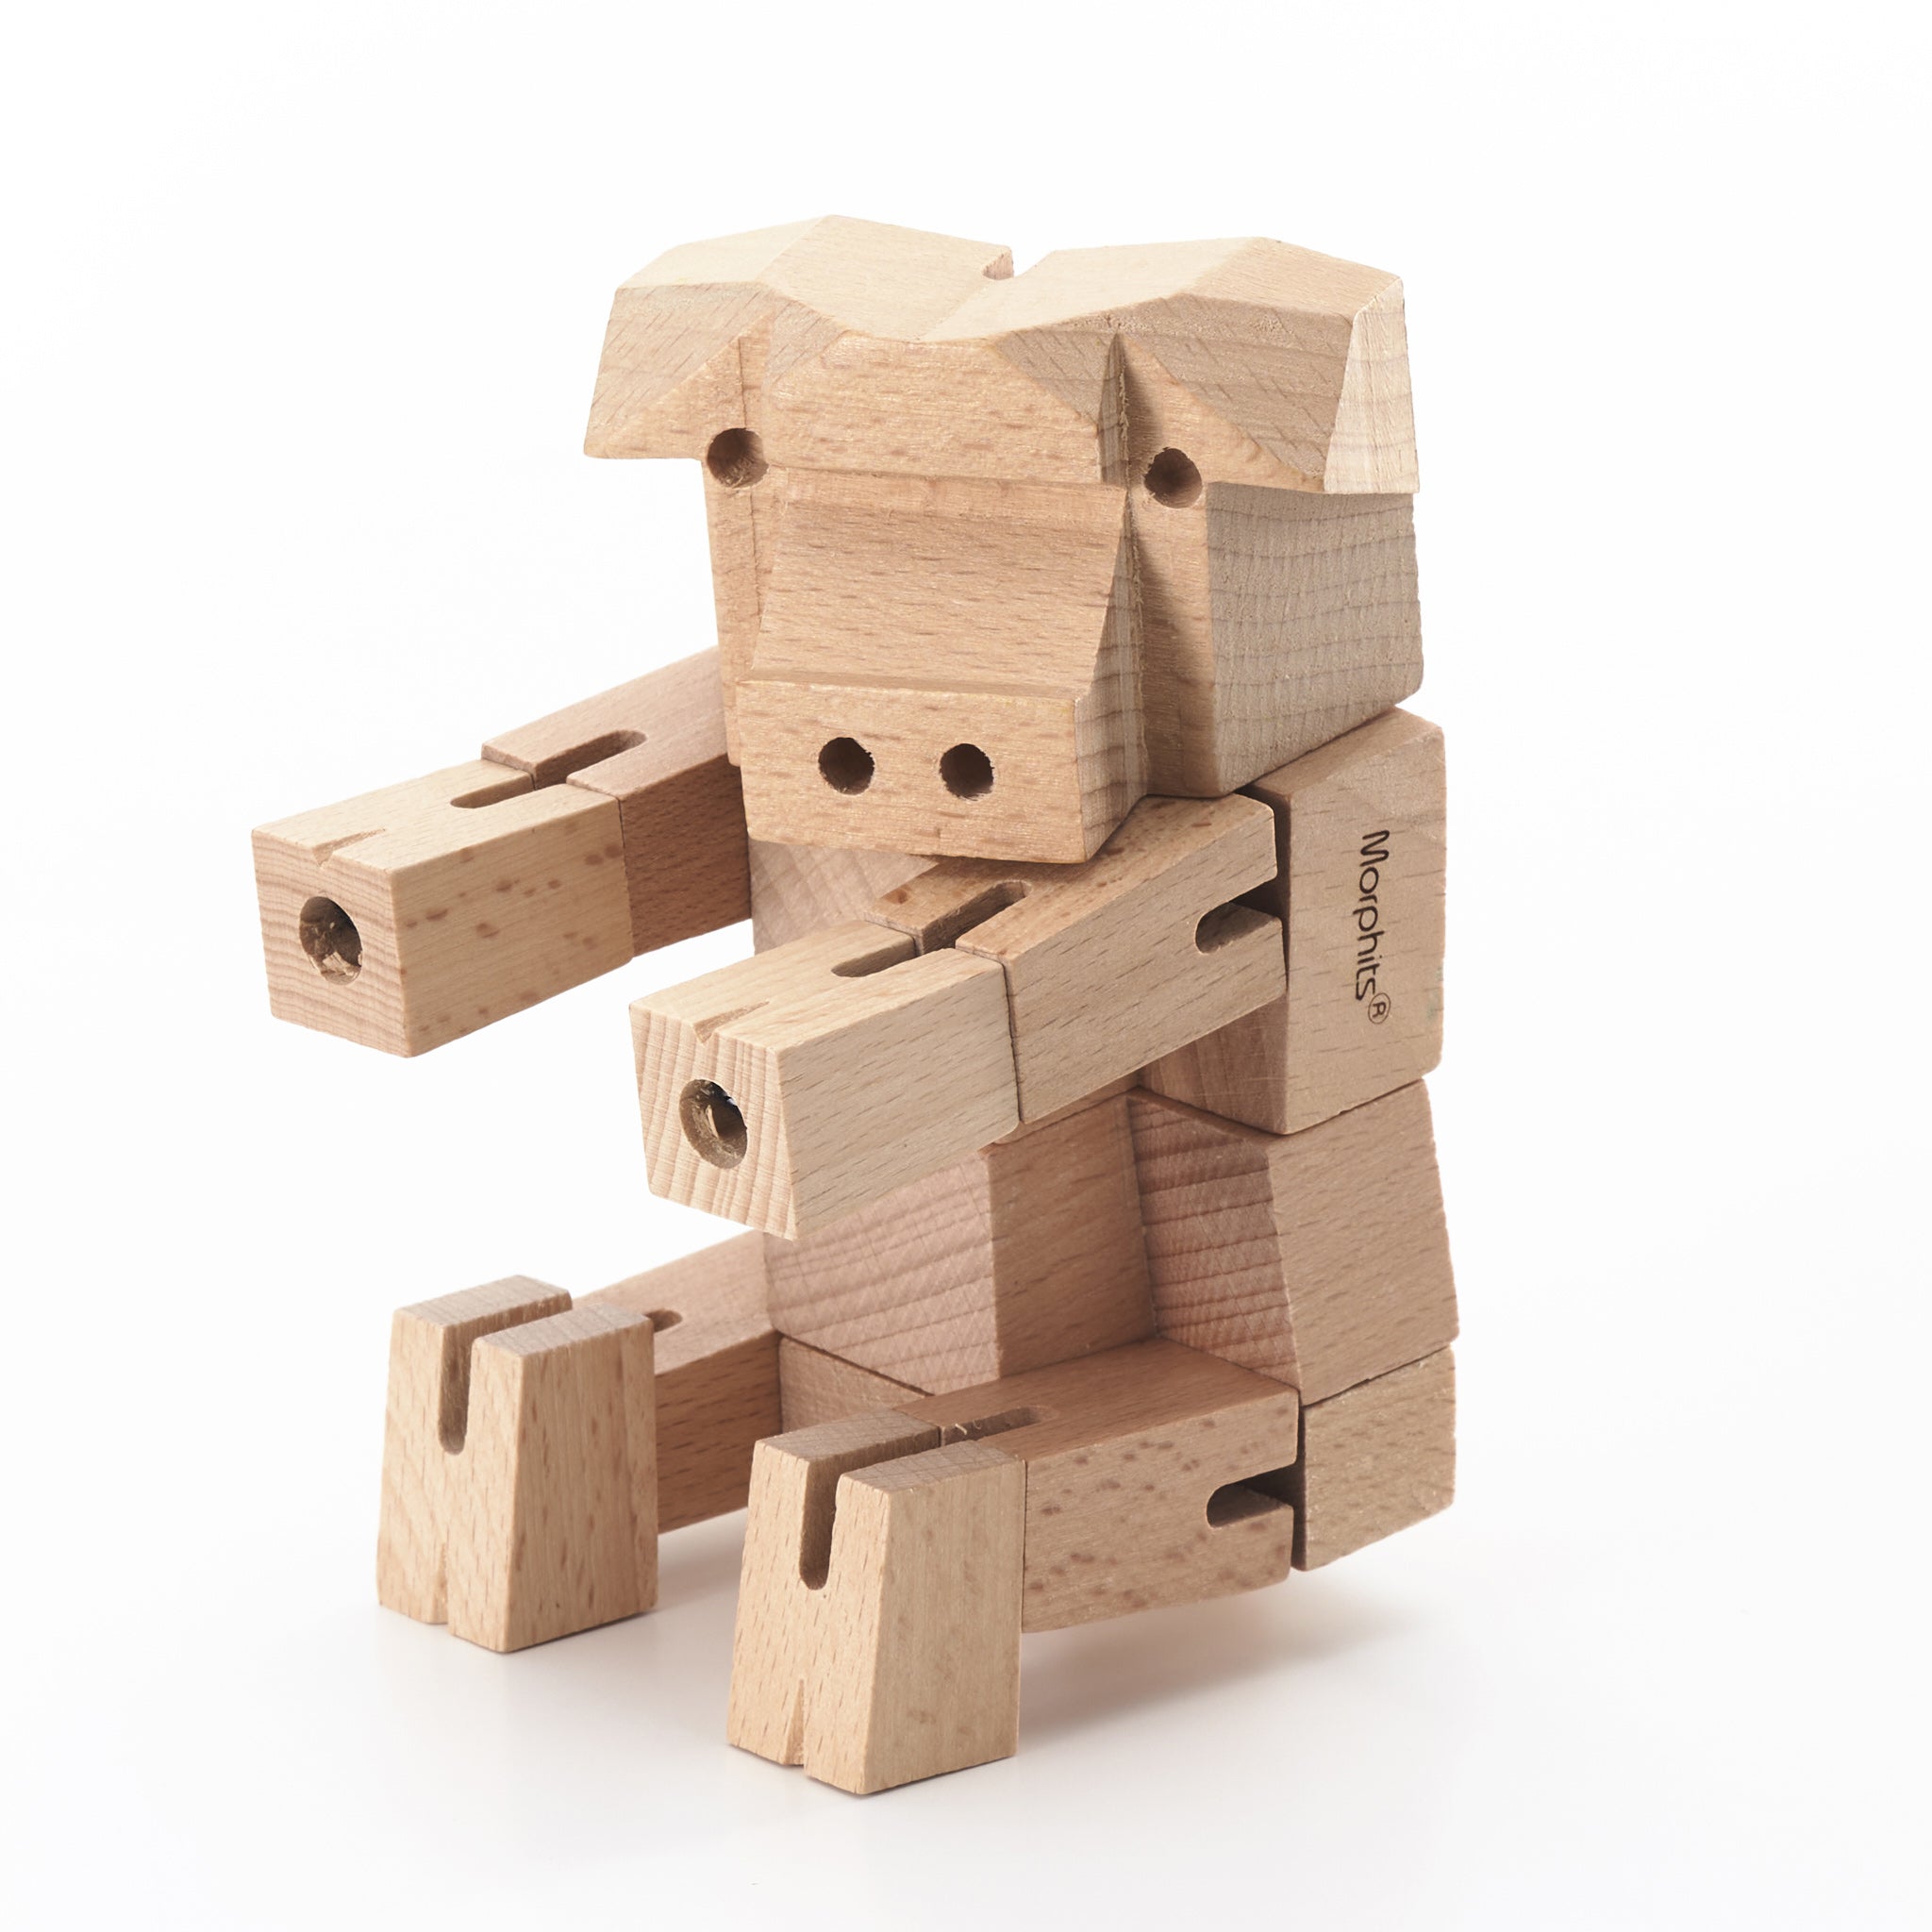 Morphits ® Pig Wooden Toy: Whimsical Wooden Playset Companions for Imaginative Minds - Yoshiaki Ito Design Stand N2